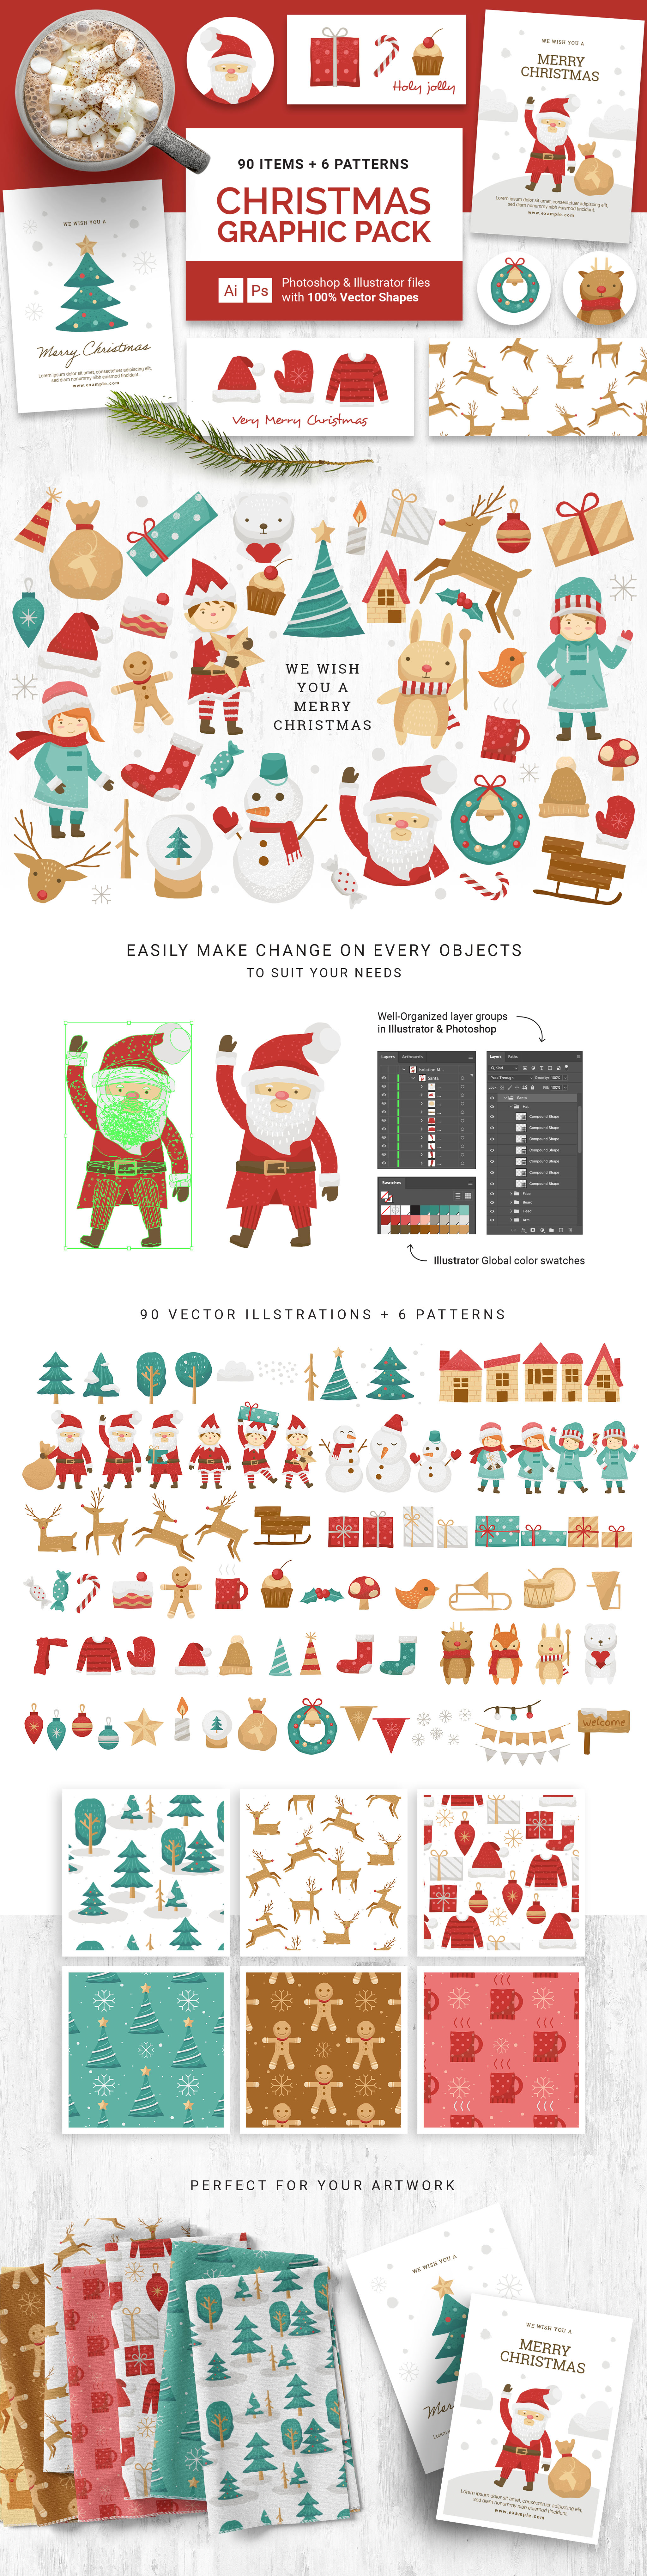 Christmas Vector Graphics Pack for Photoshop & Illustrator